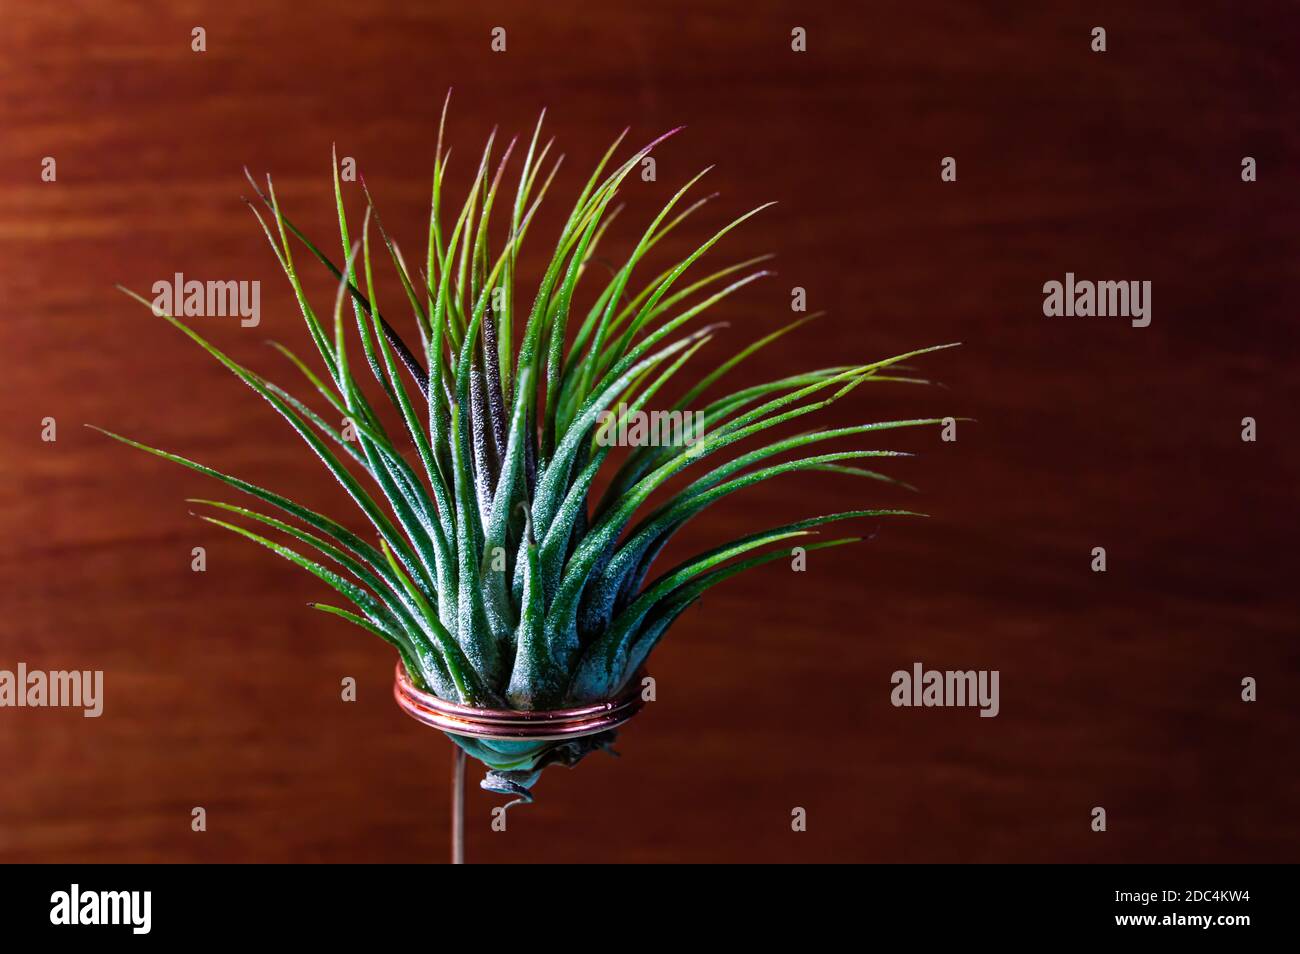 Close-up of a Mexican air plant hold by a copper wire against a red wooden background Stock Photo